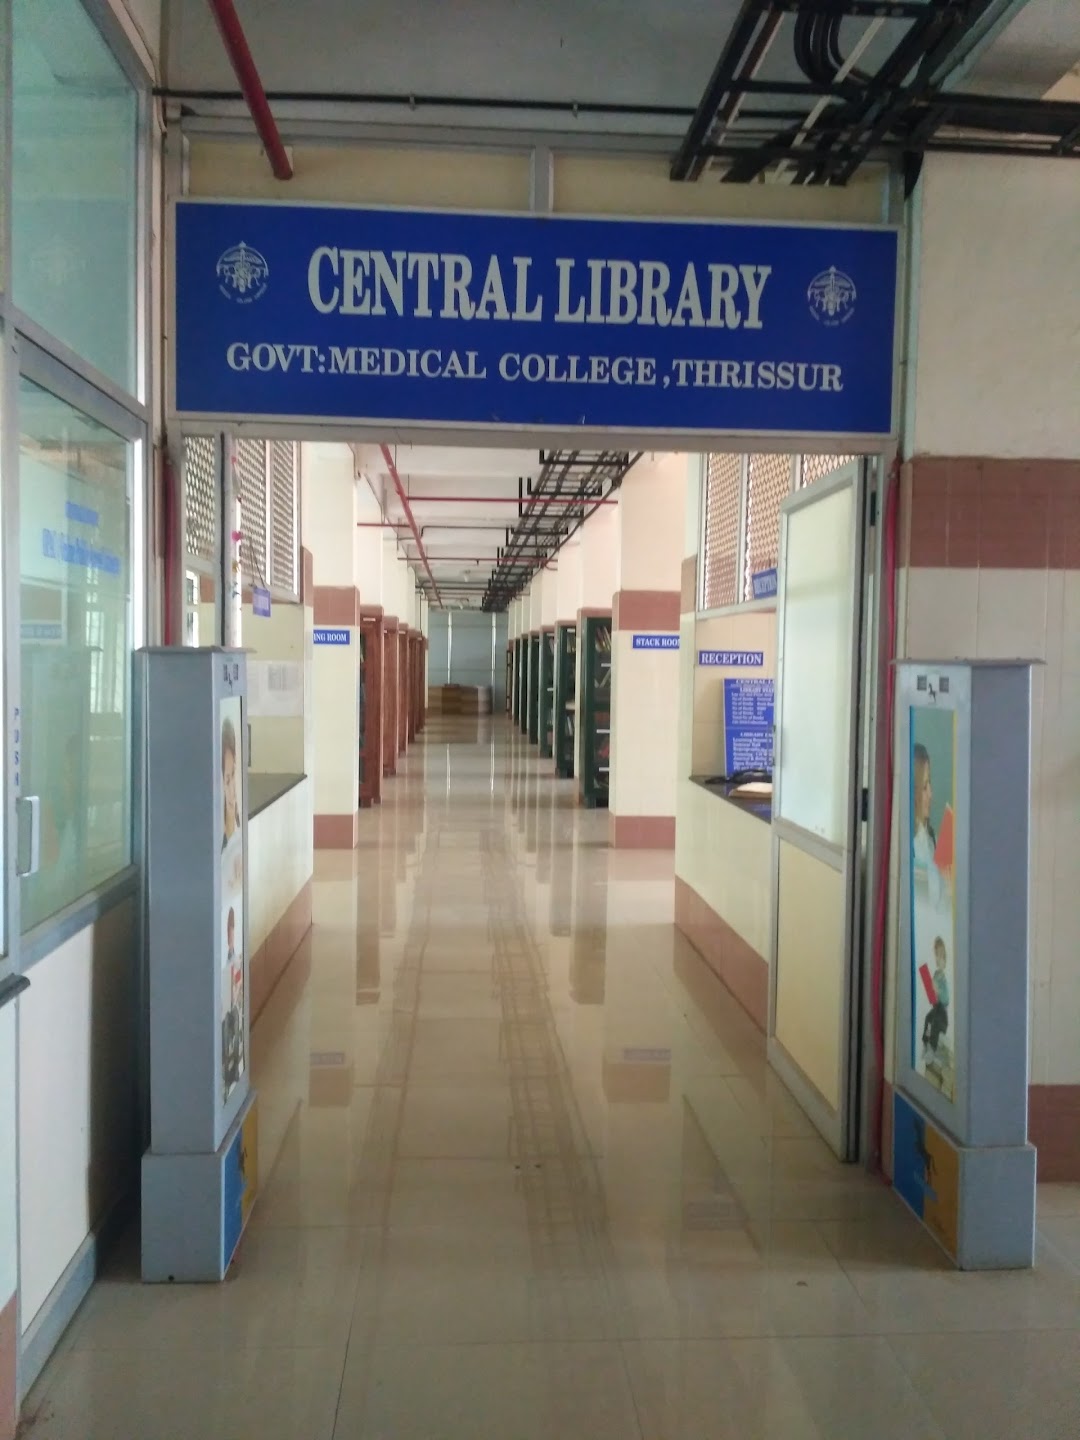 Central Library, Government Medical College, Thrissur